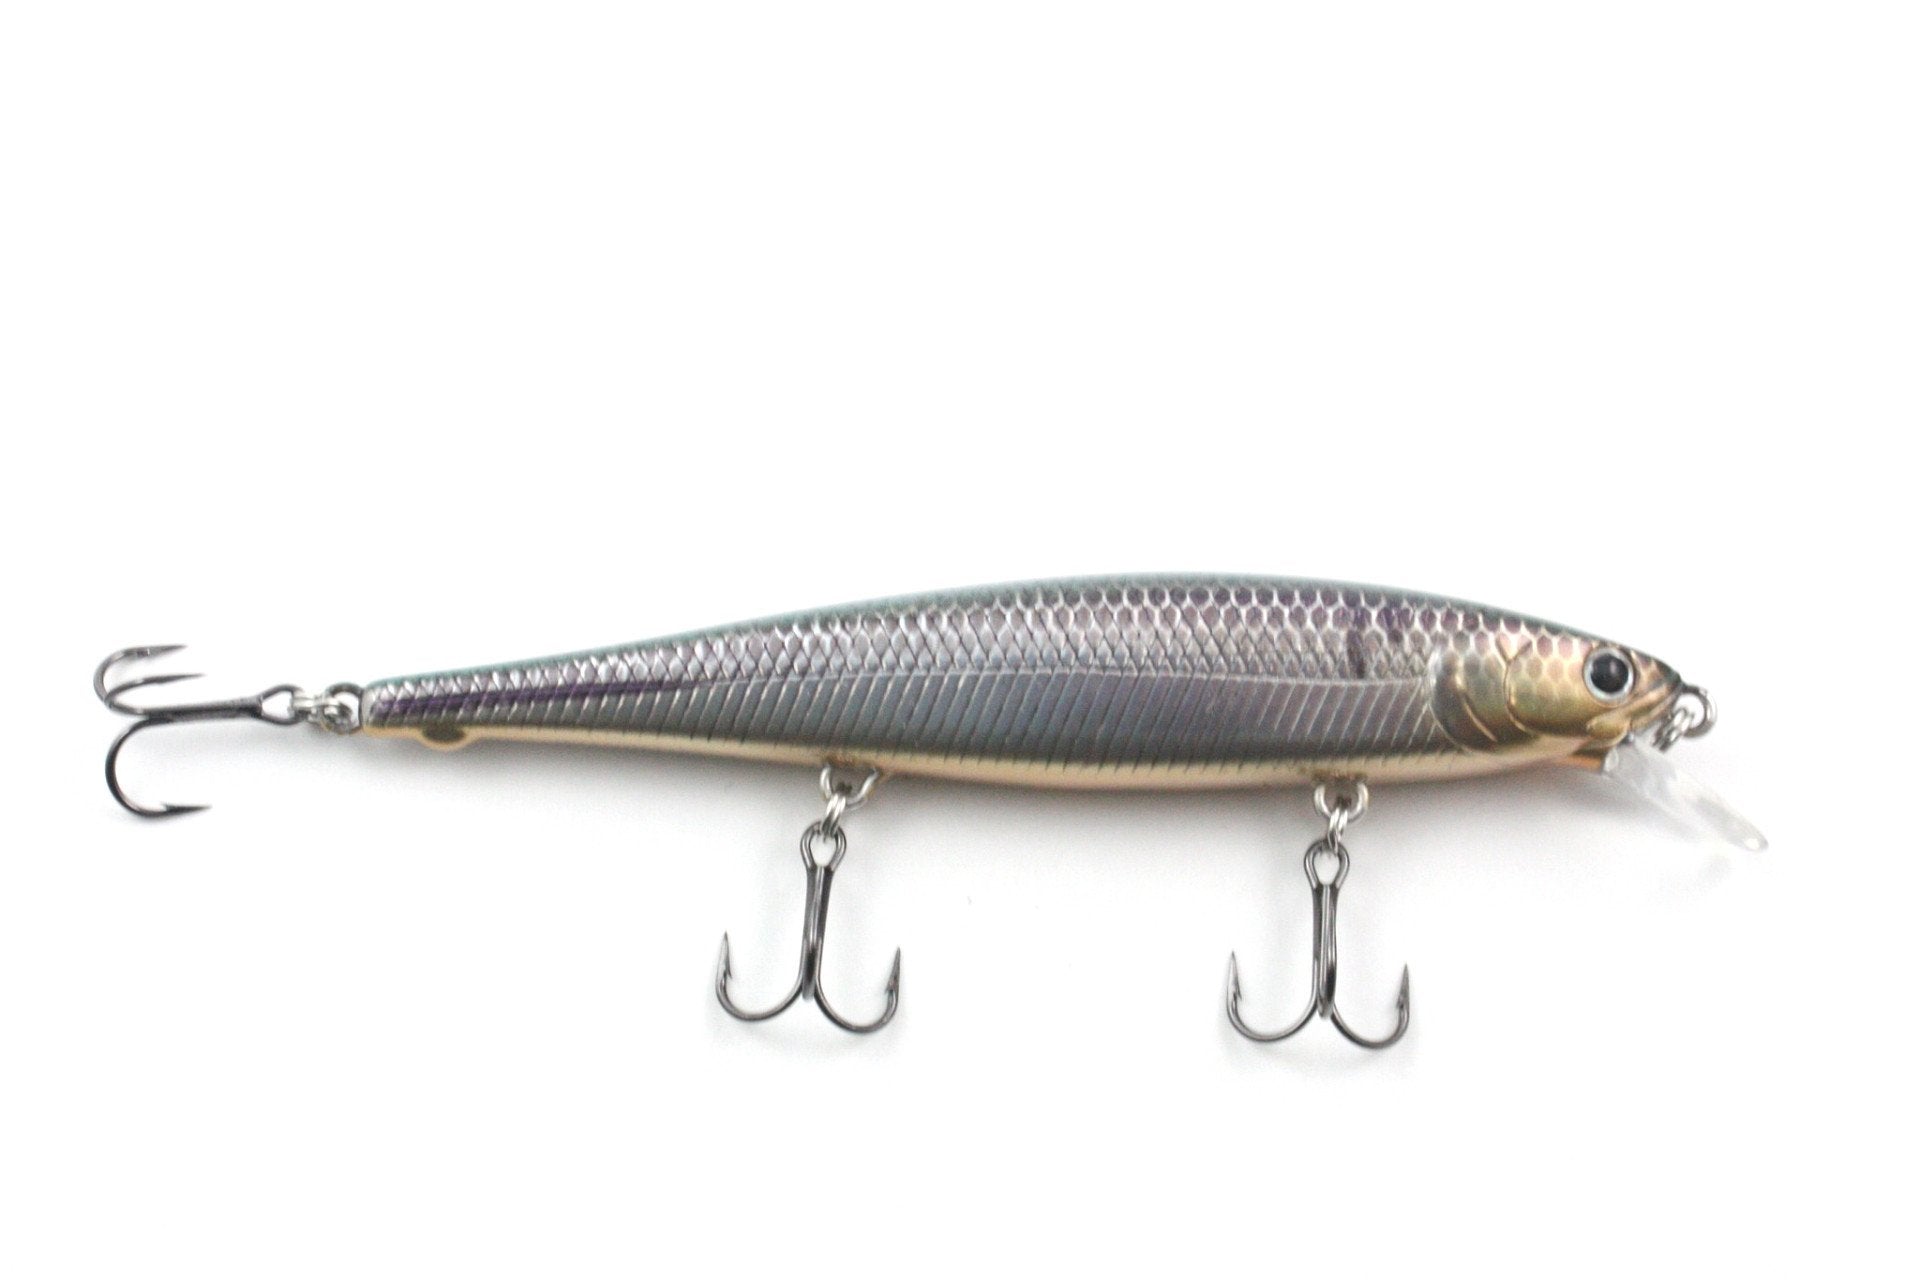 LUCKY CRAFT Pointer 65 (268 Pearl Ayu), Topwater Lures -  Canada